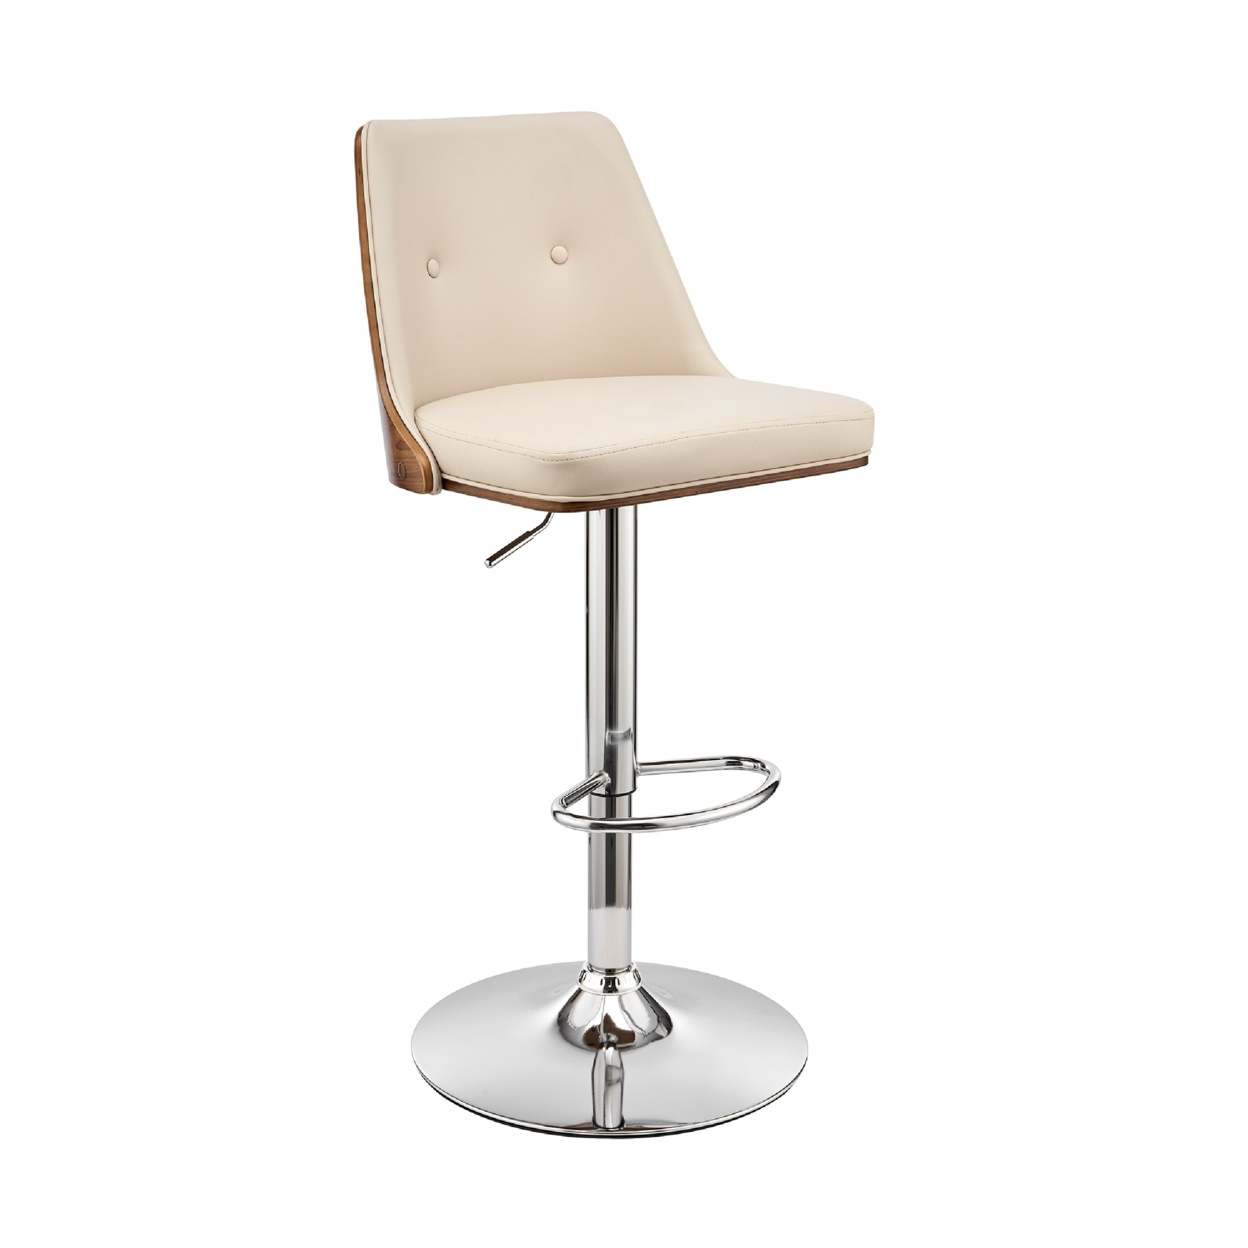 Adjustable Barstool With Faux Leather And Wooden Backing, Cream And Brown- Saltoro Sherpi